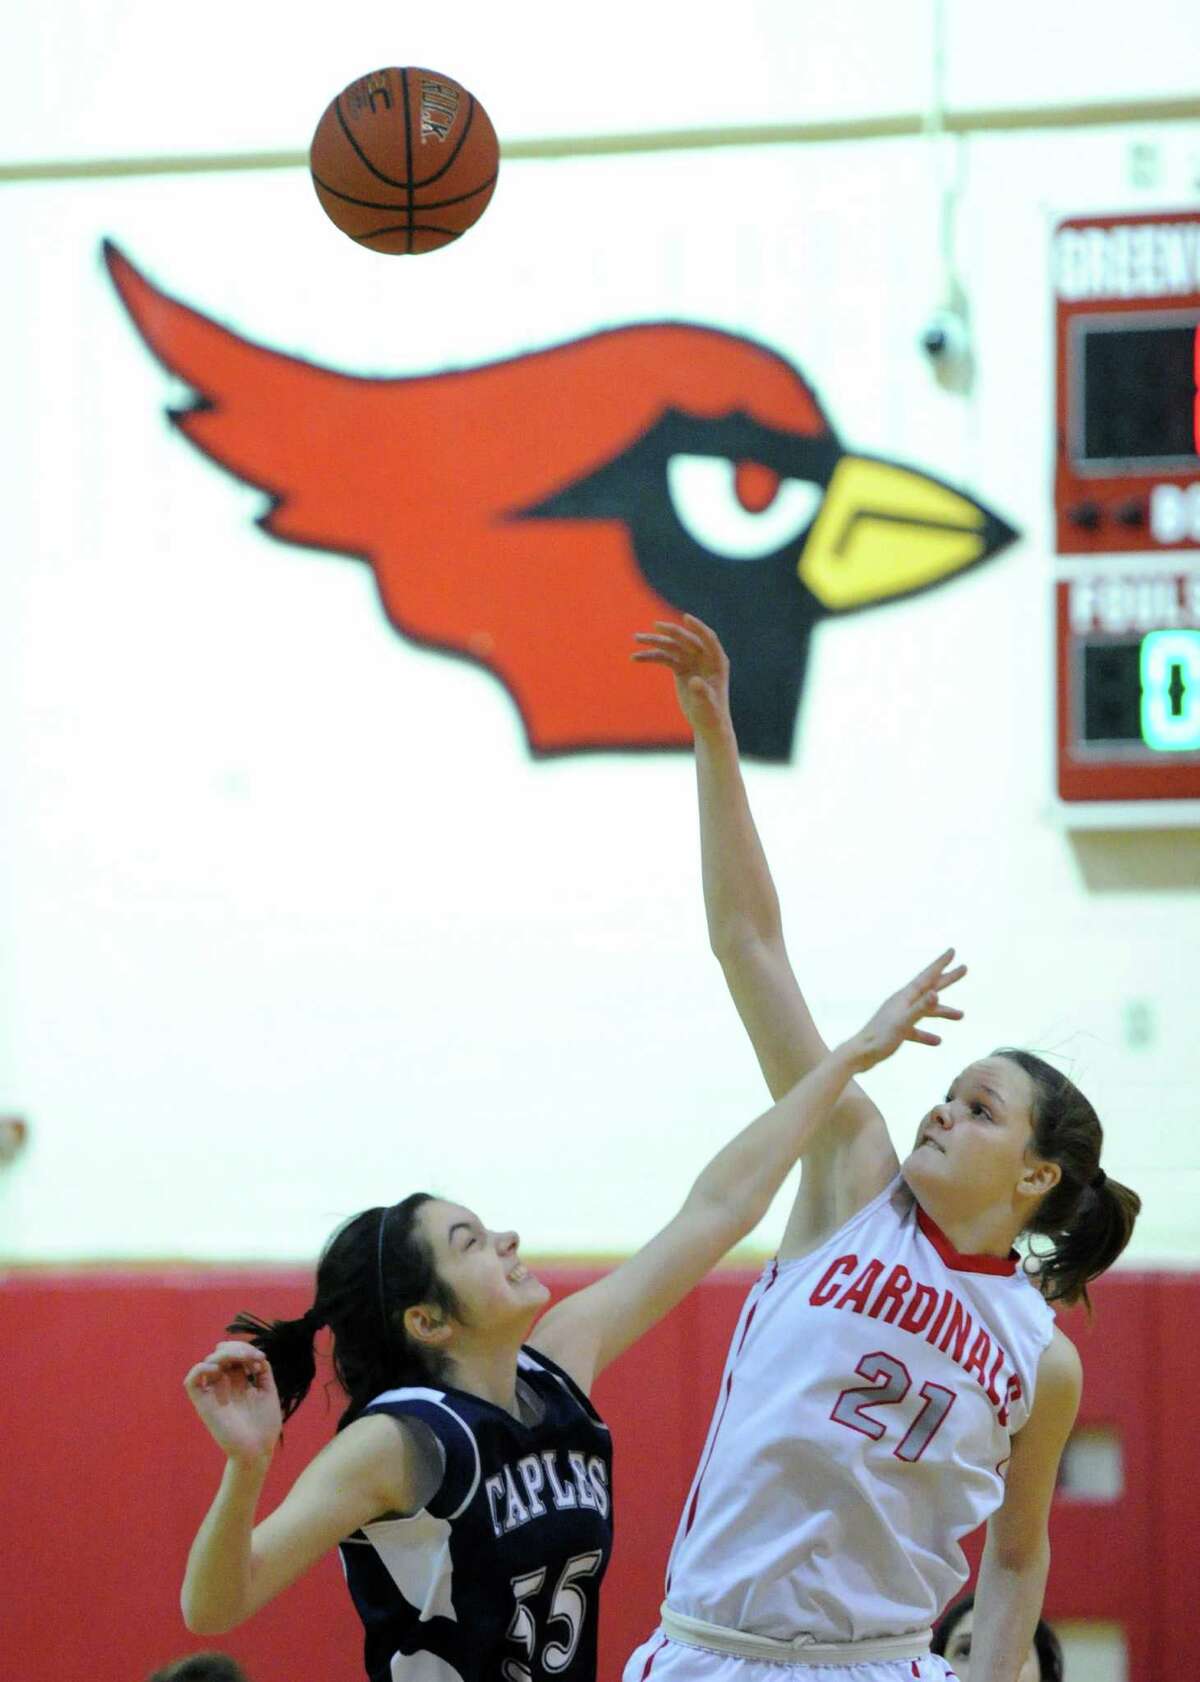 At left, Olivia Troy (# 55) of Staples jumps ball against Abby Wolf (# 21) of Greenwich during the girls high school basketball game between Greenwich High School and Staples High School at Greenwich, Tuesday, Jan. 7, 2014.